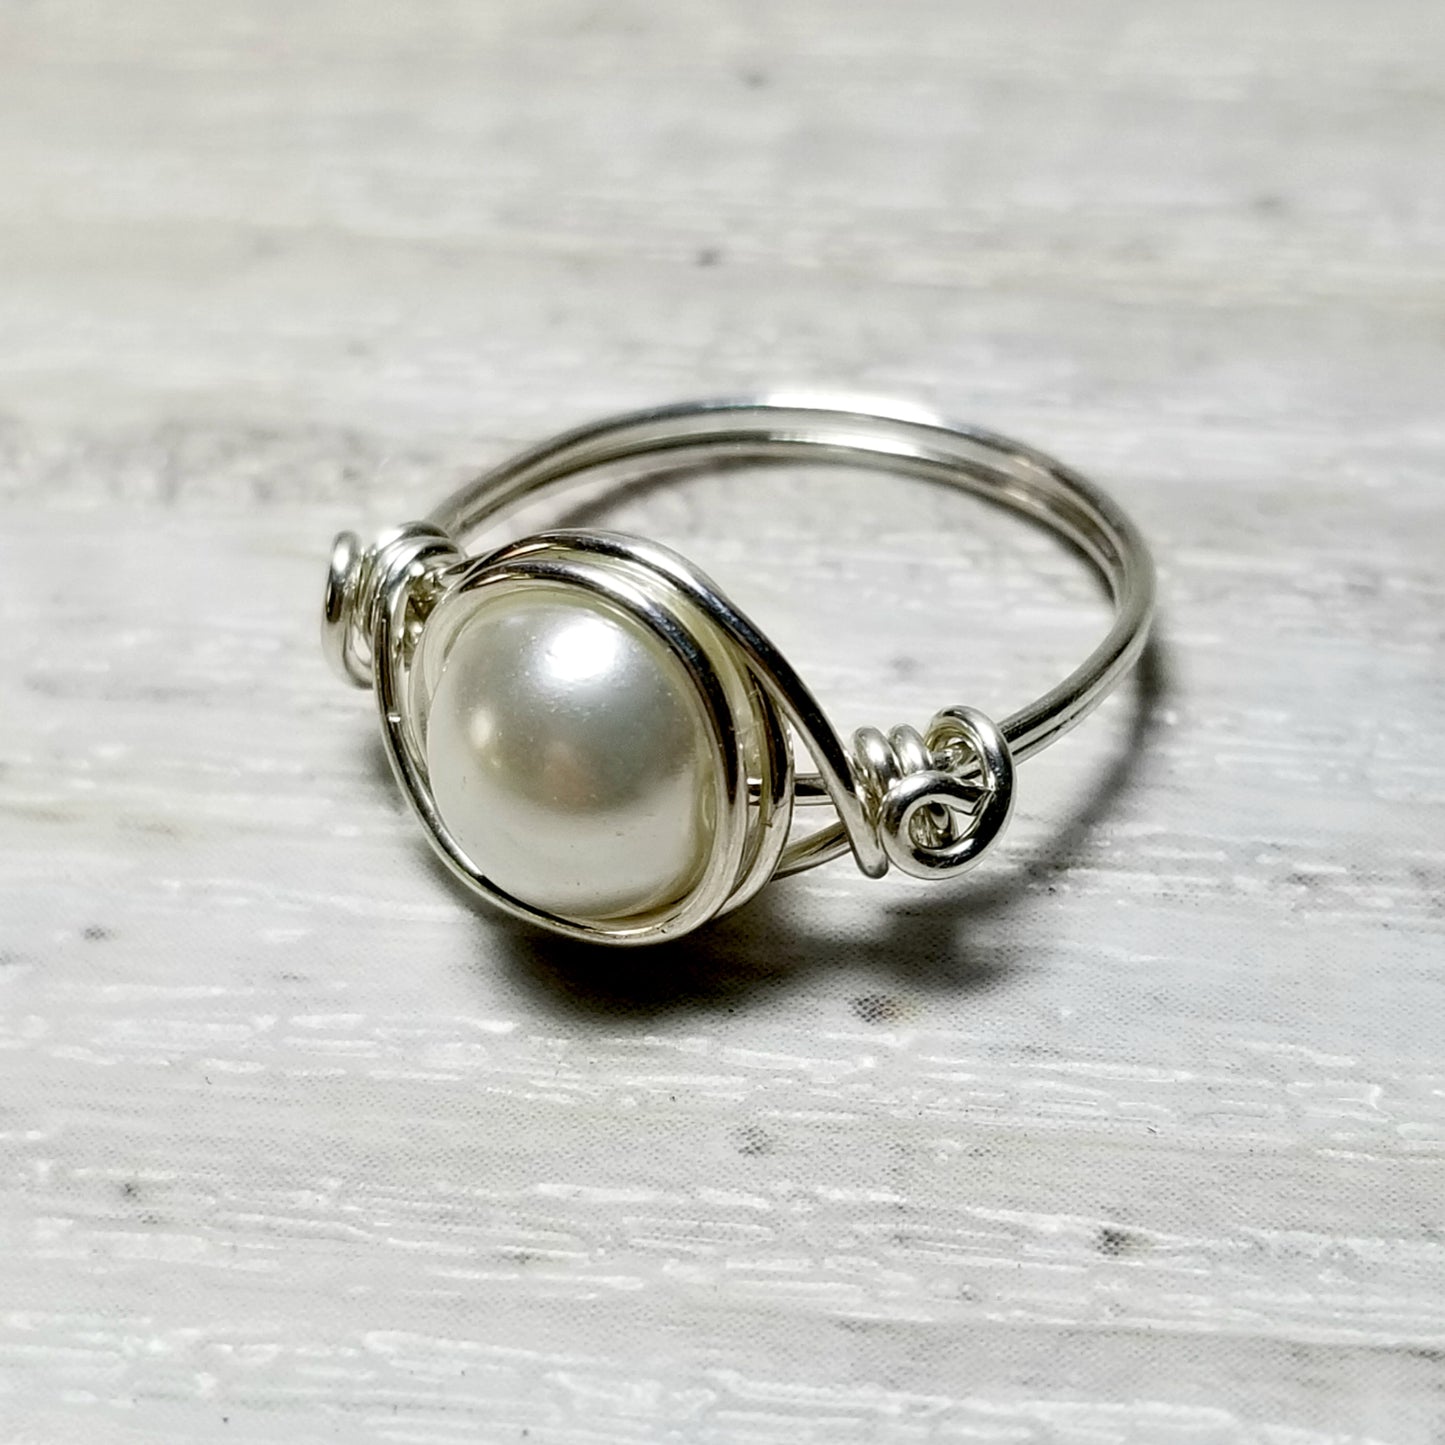 White Pearl Ring, Sterling Silver Stacking Ring, Gift Idea